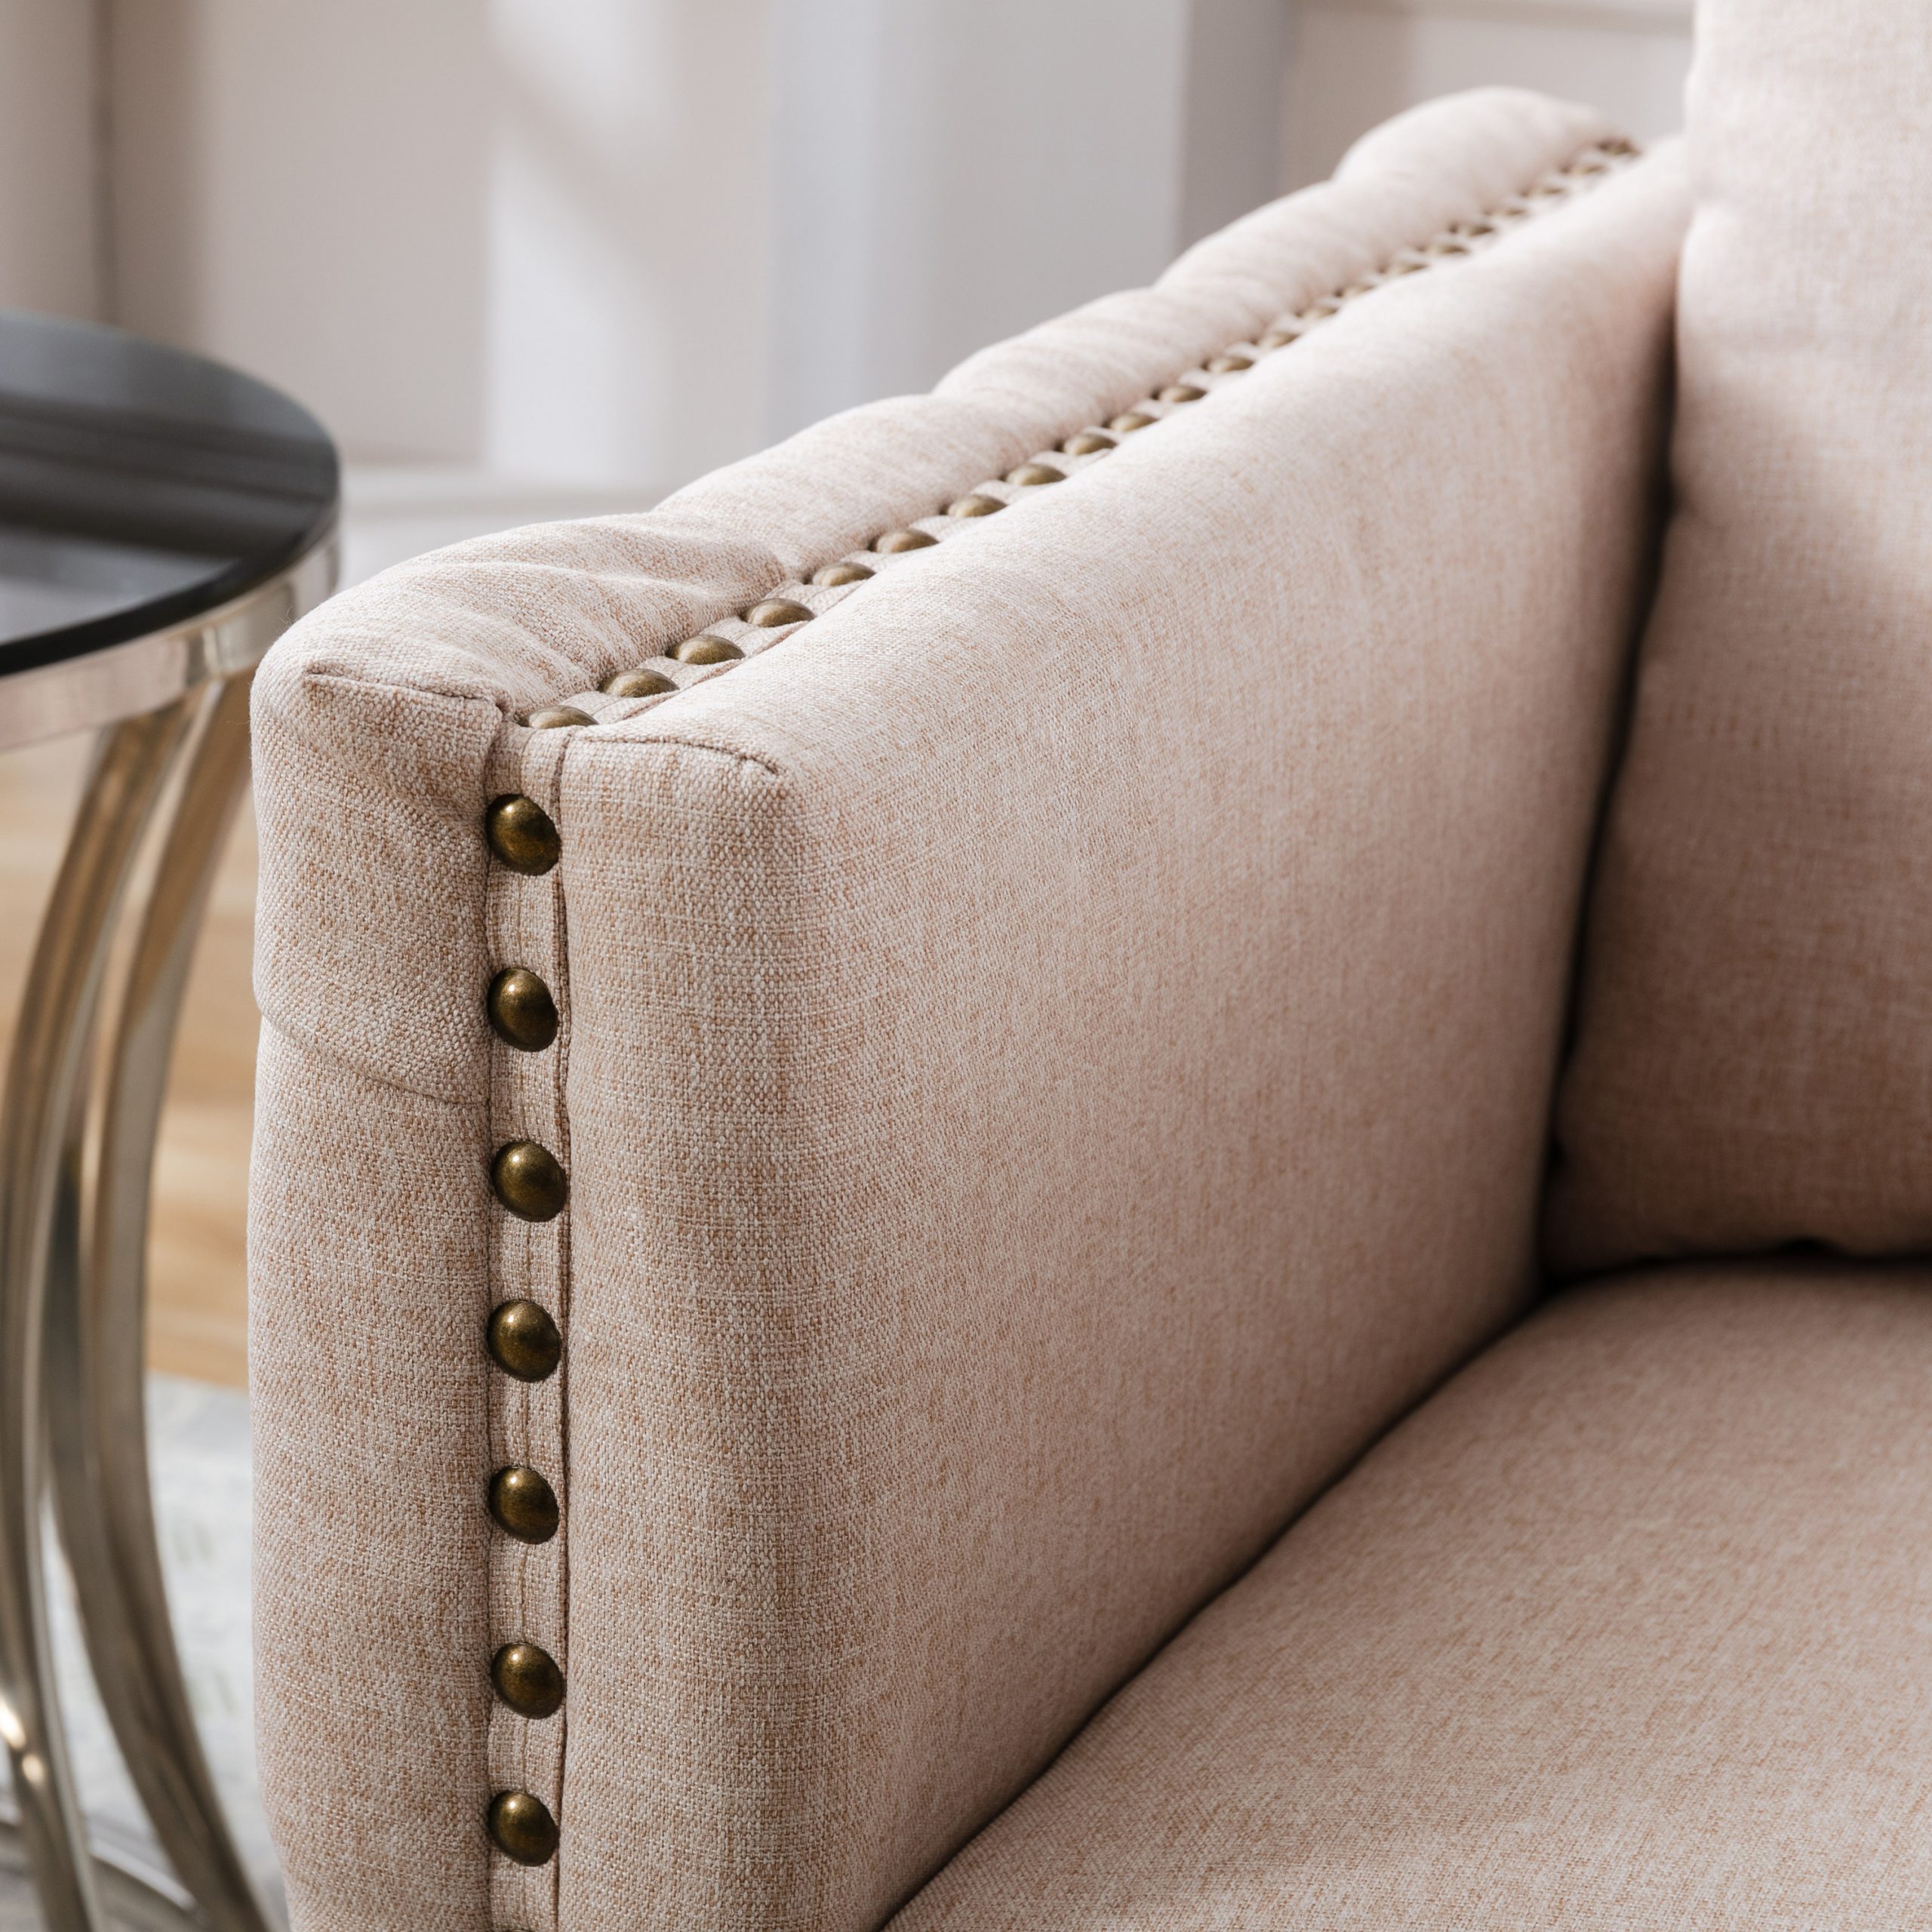 Modern Tufted Button Accent Chair - PP281169AAT